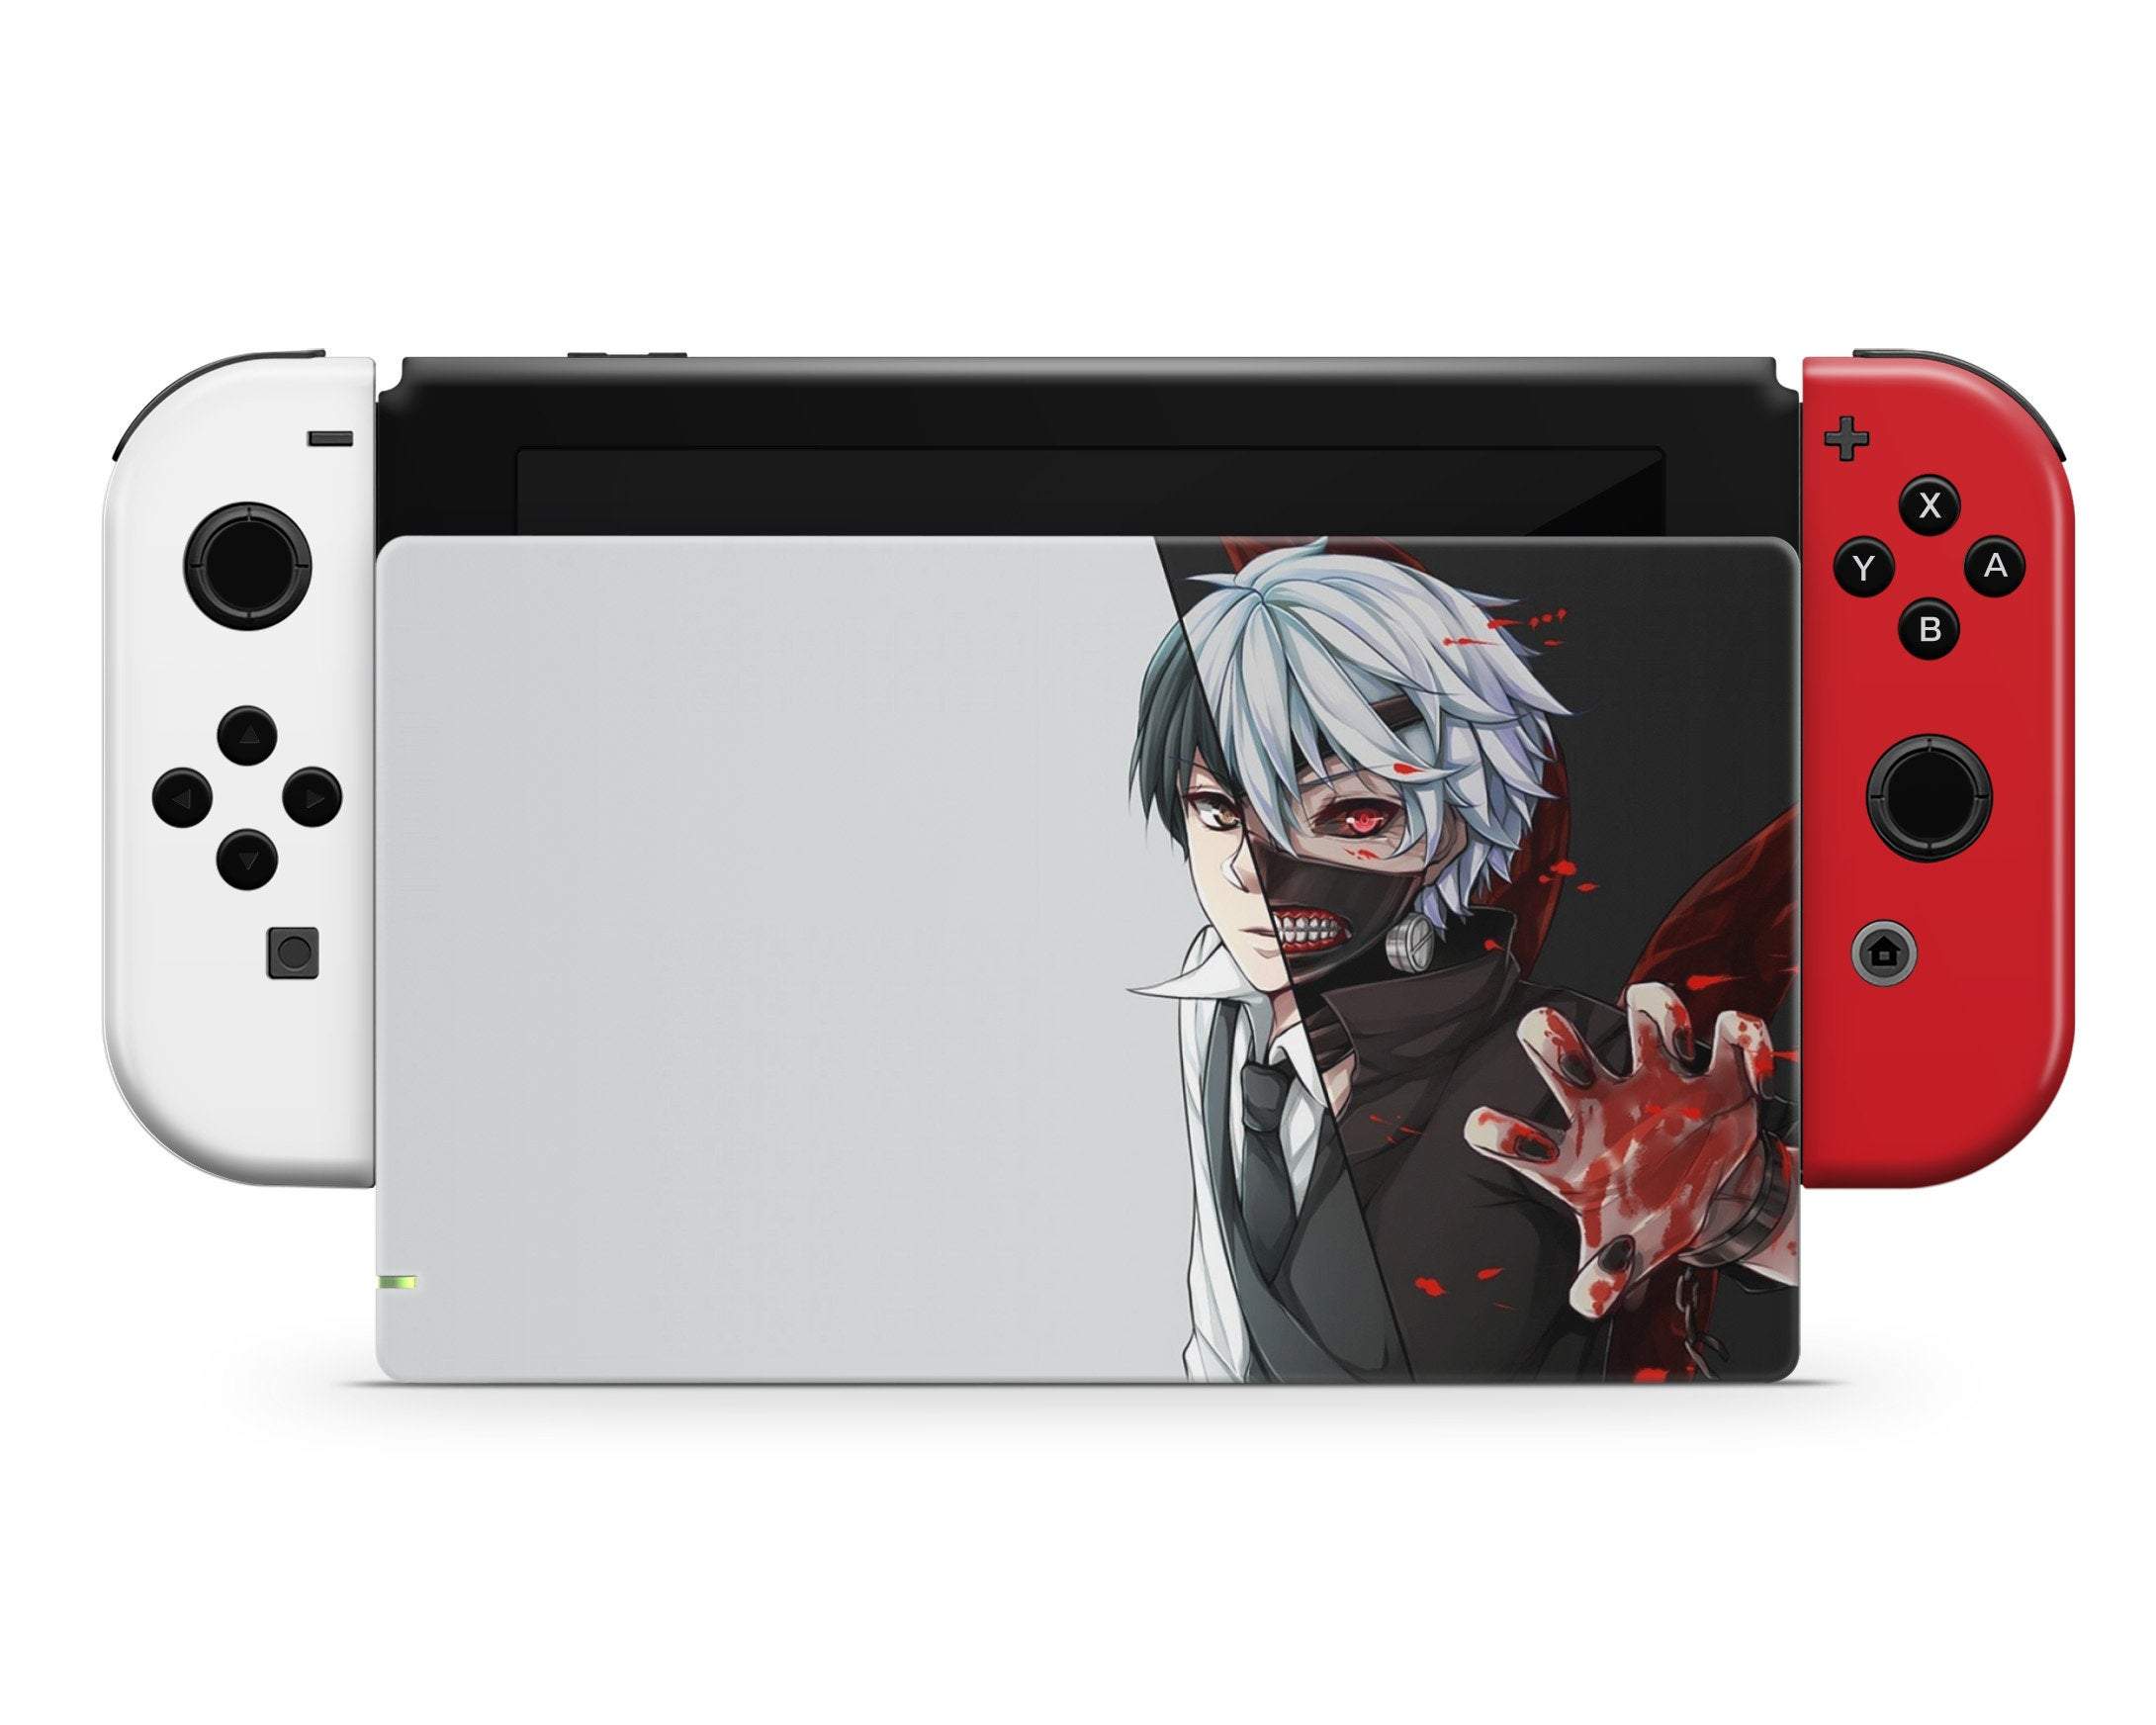 Anime Crossing Teal Leaves Nintendo Switch Pro Skin  Lux Skins Official